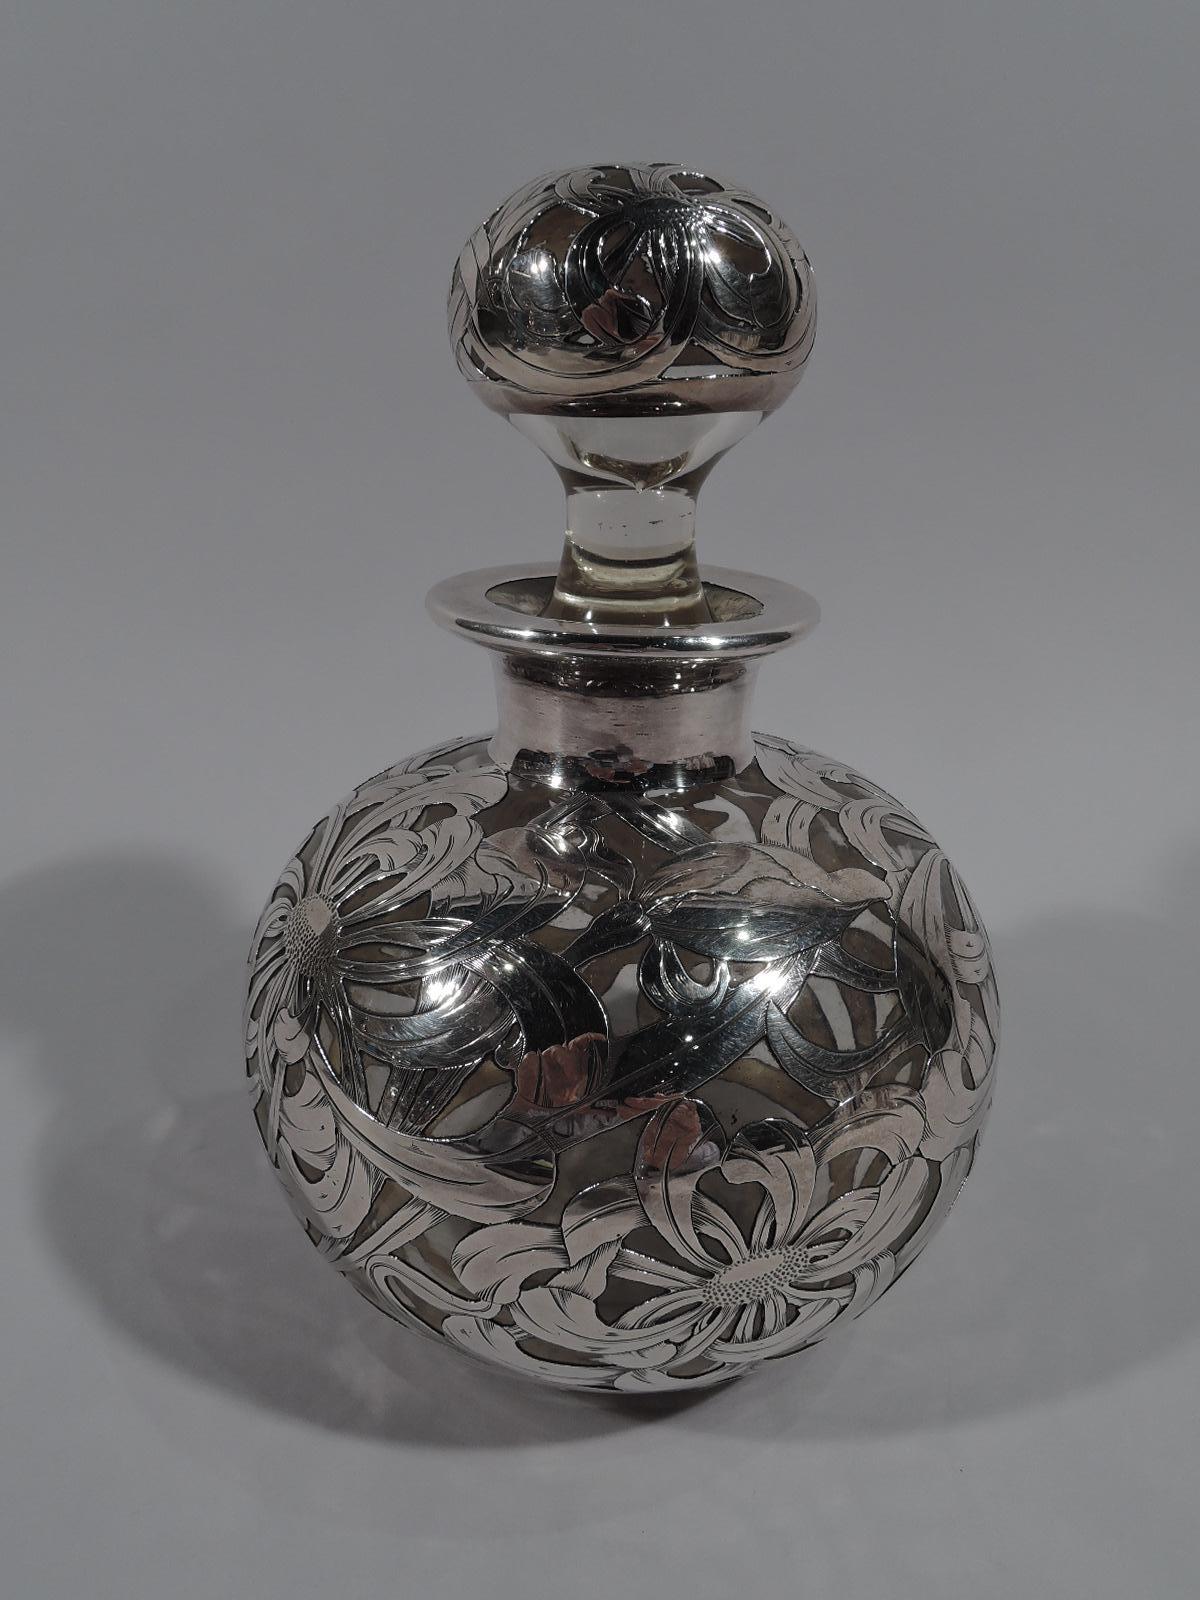 Large turn-of-the-century American Art Nouveau glass cologne bottle with engraved silver overlay. Globular; short neck and everted rim in collar. Ball stopper. Dense overlapping and interlaced overlay in form of flower heads and tendrils. Glass is